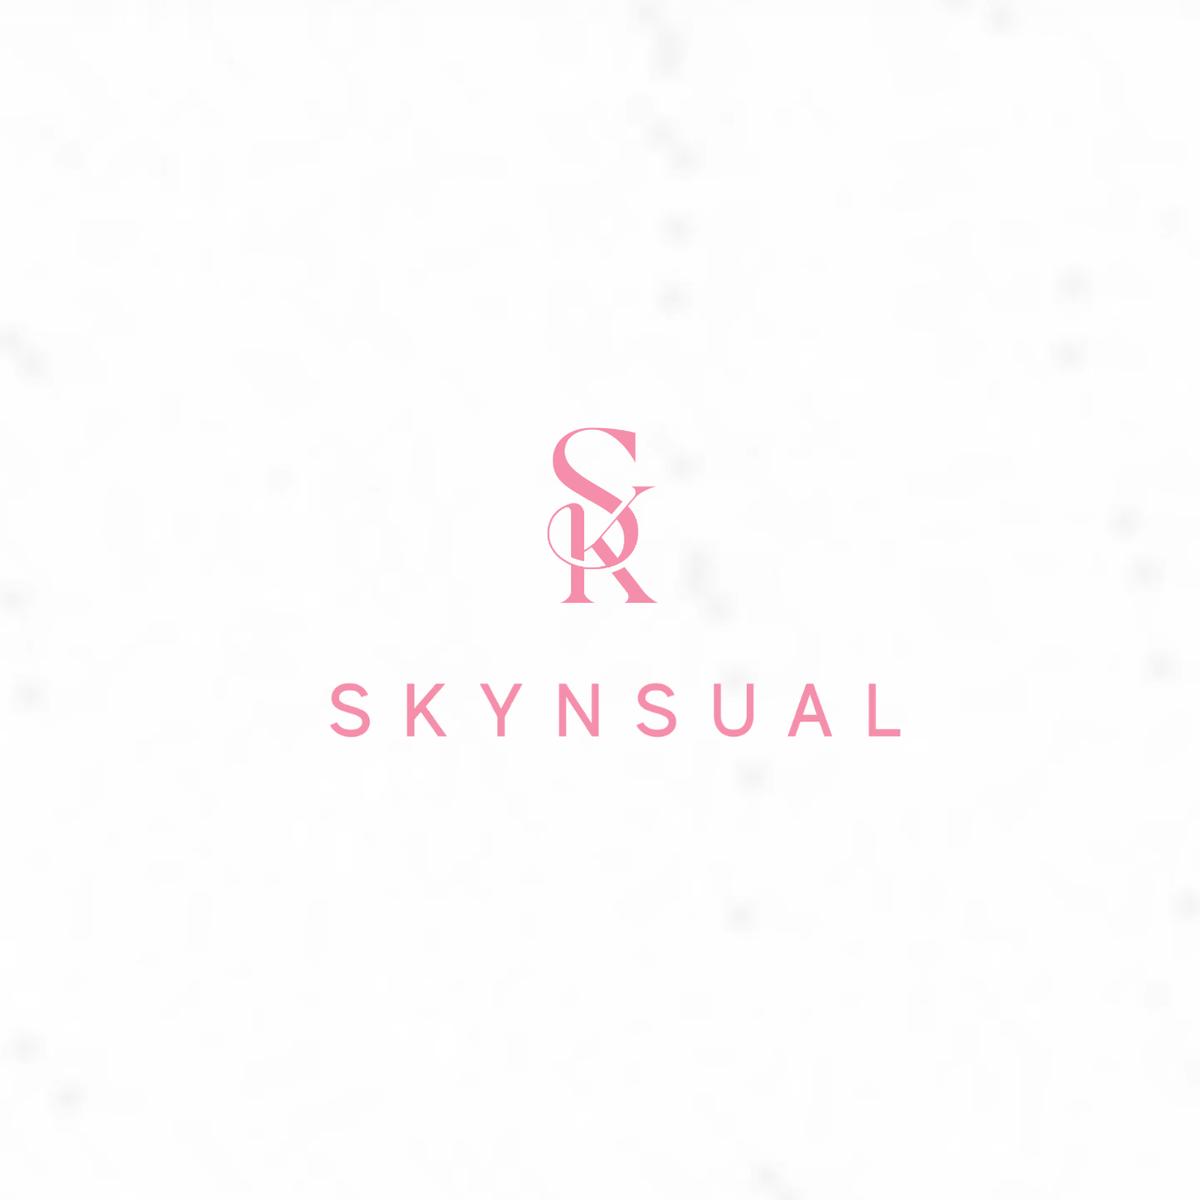 Skynsual